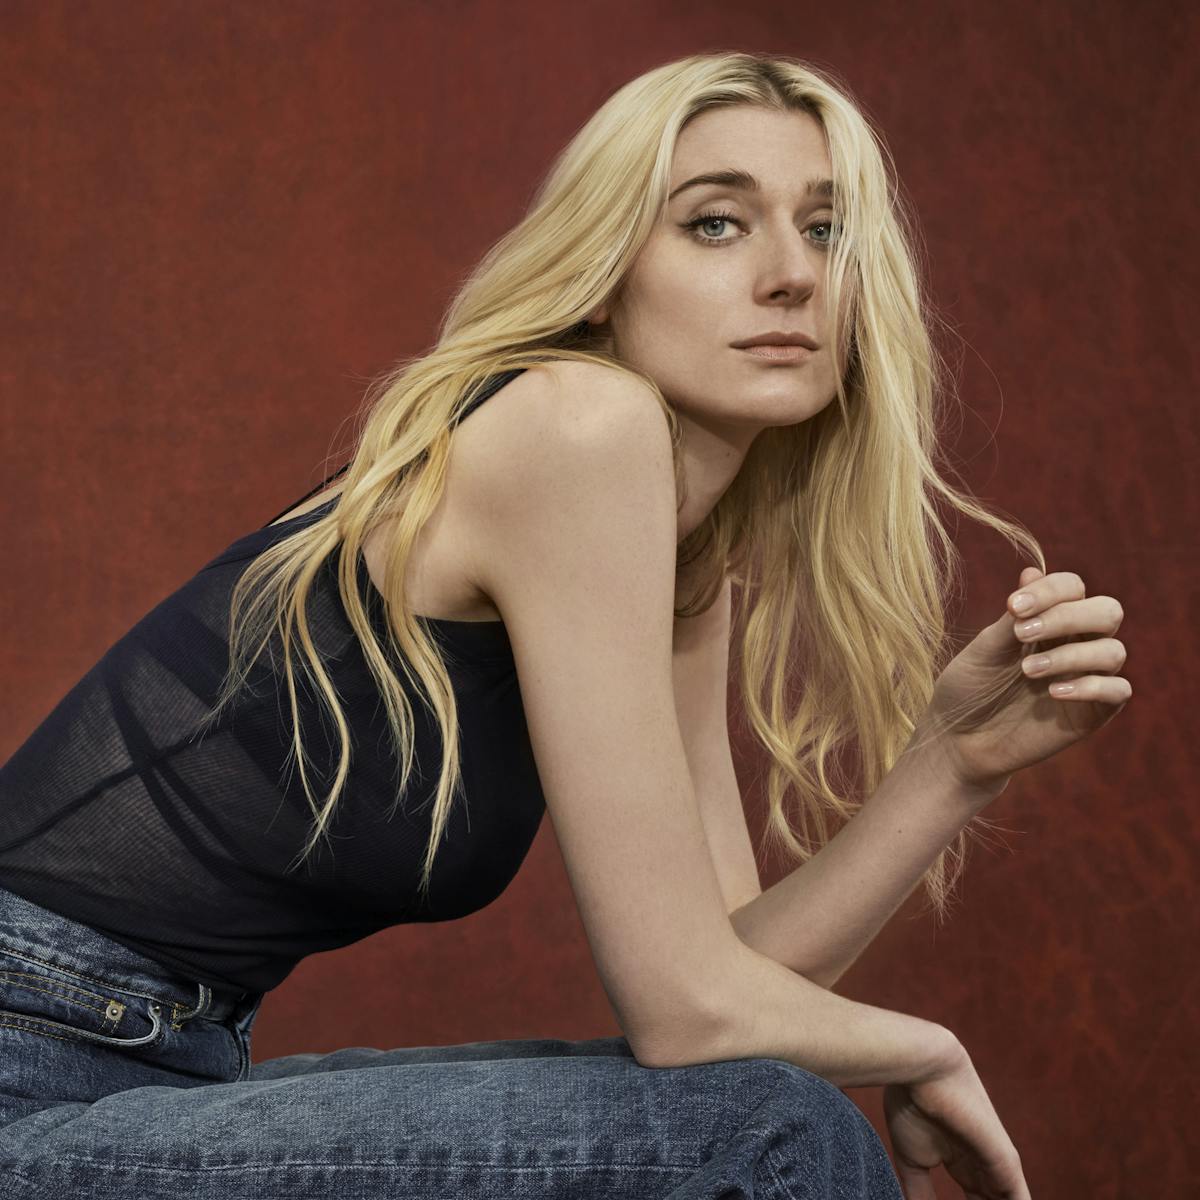 Elizabeth Debicki wears a black tank top and jeans and fiddles with her long blond hair. 